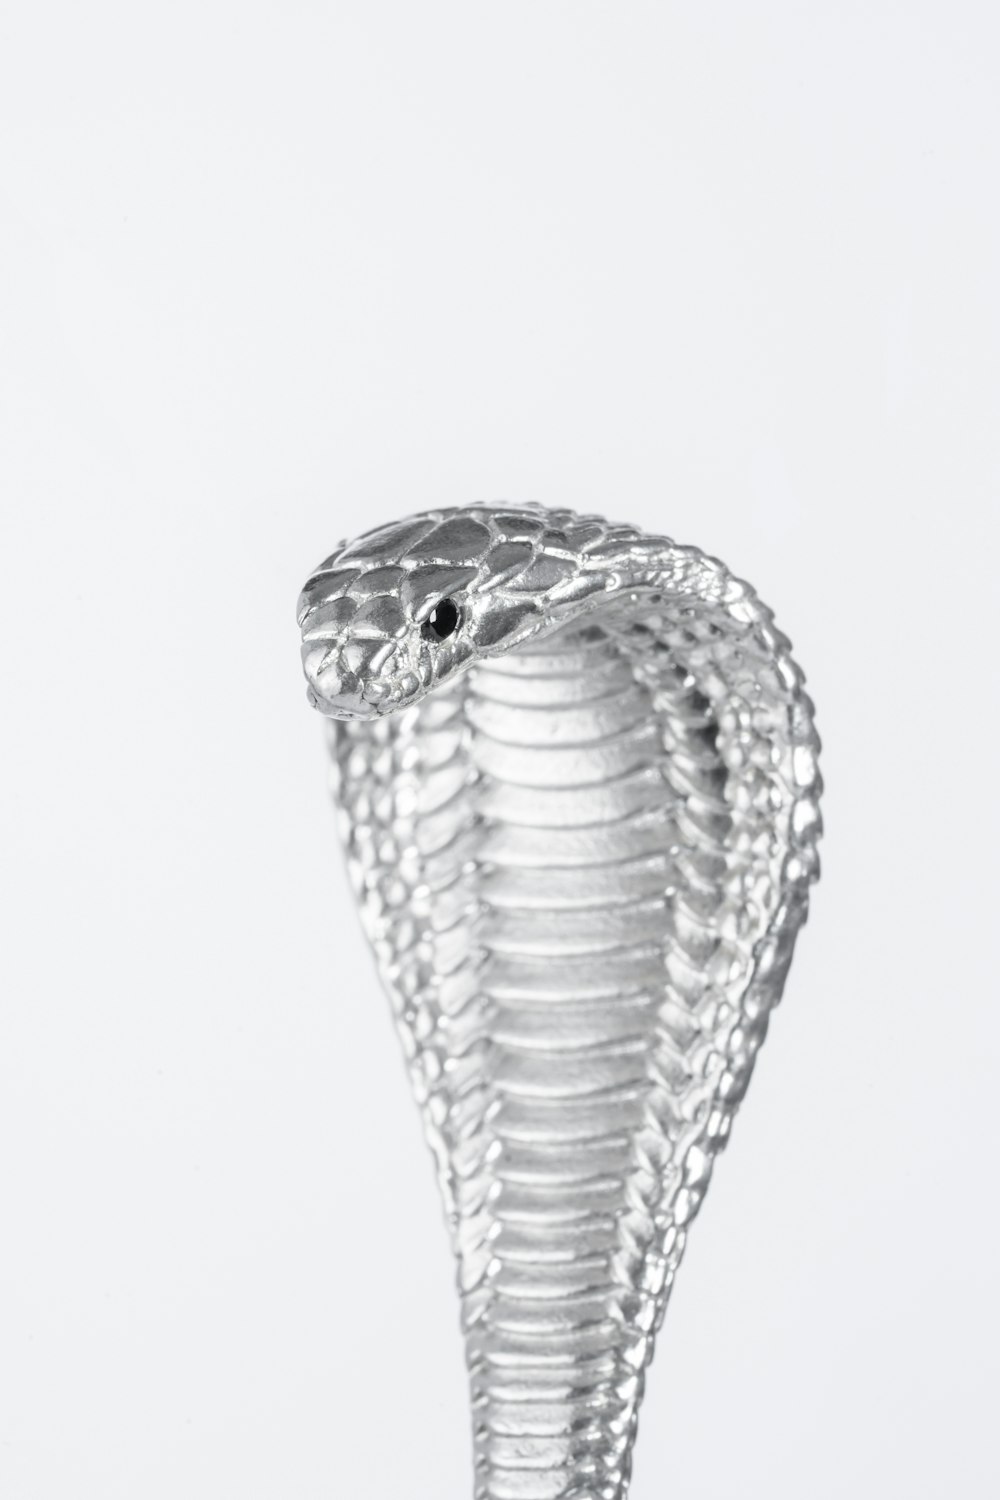 a silver snake statue on a white background